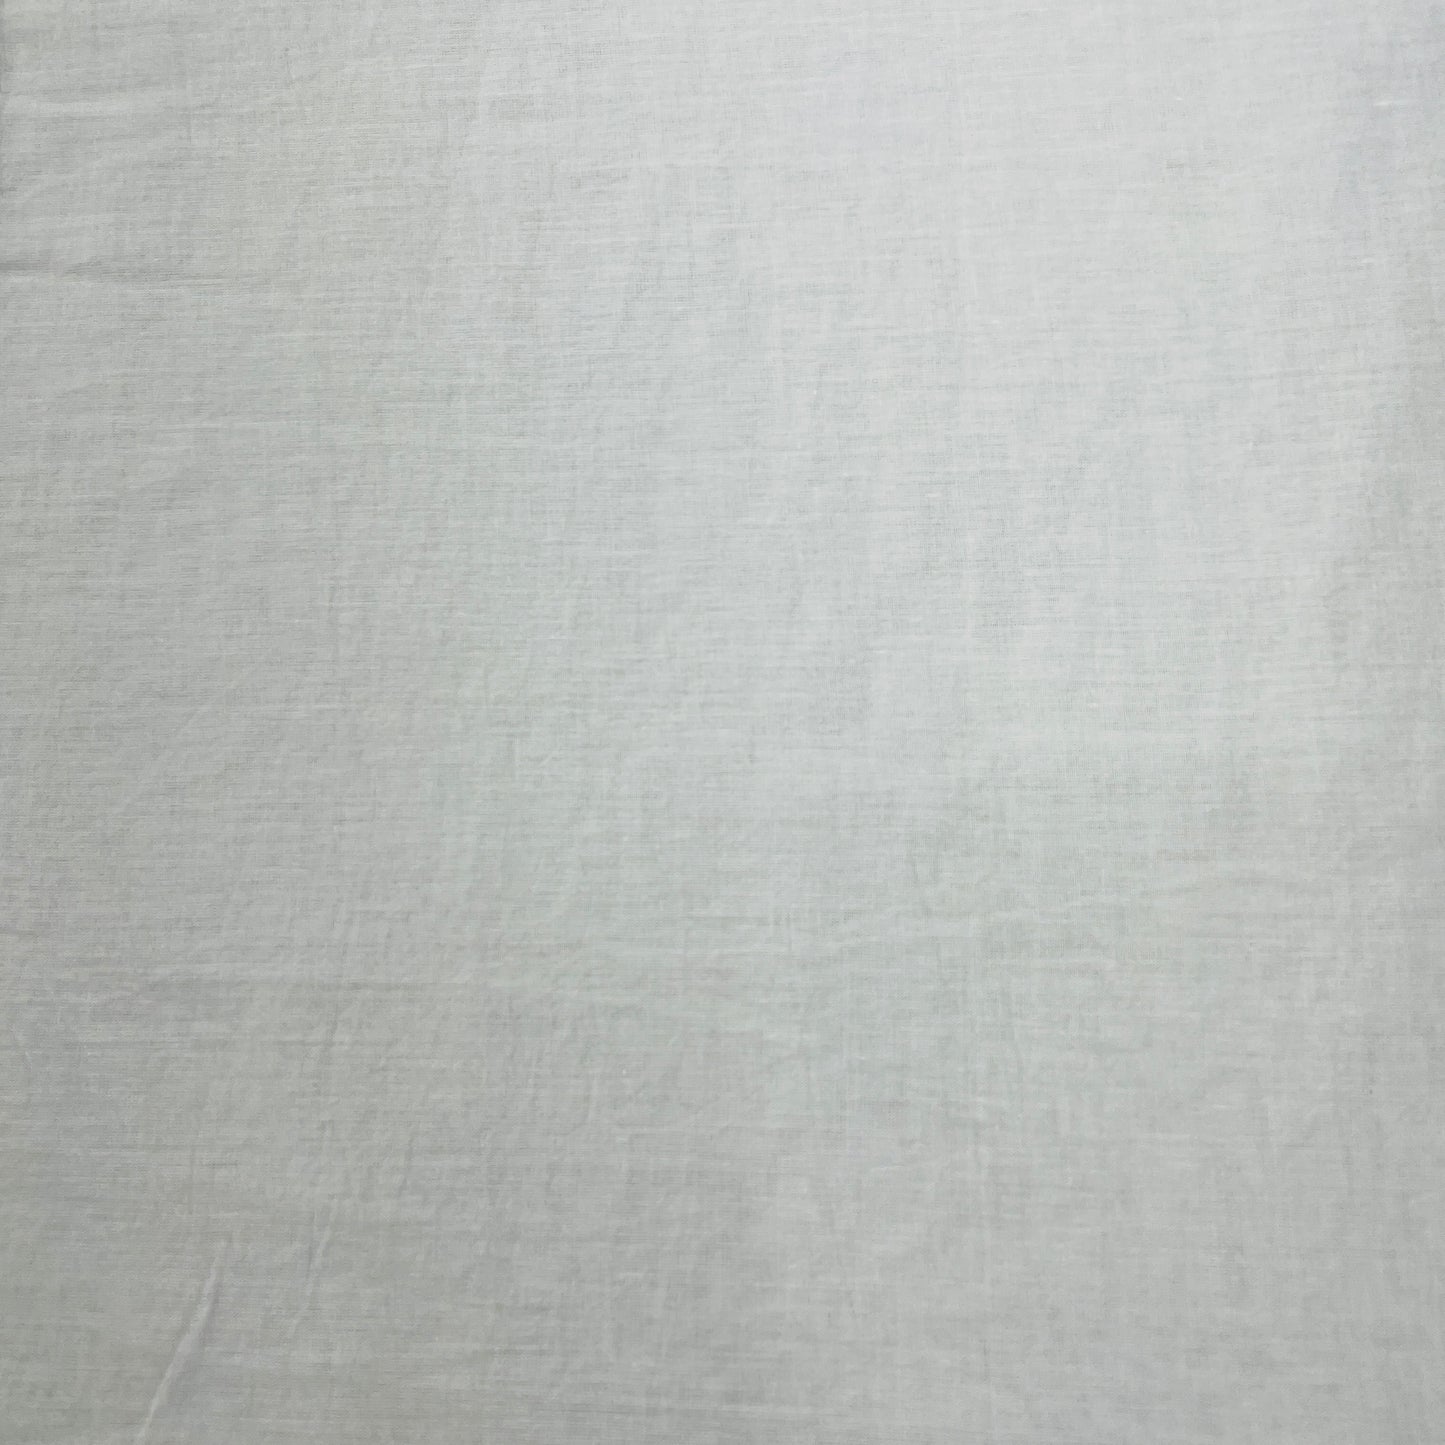 Rfd White Solid Dyeable Cotton Voile Fabric - TradeUNO